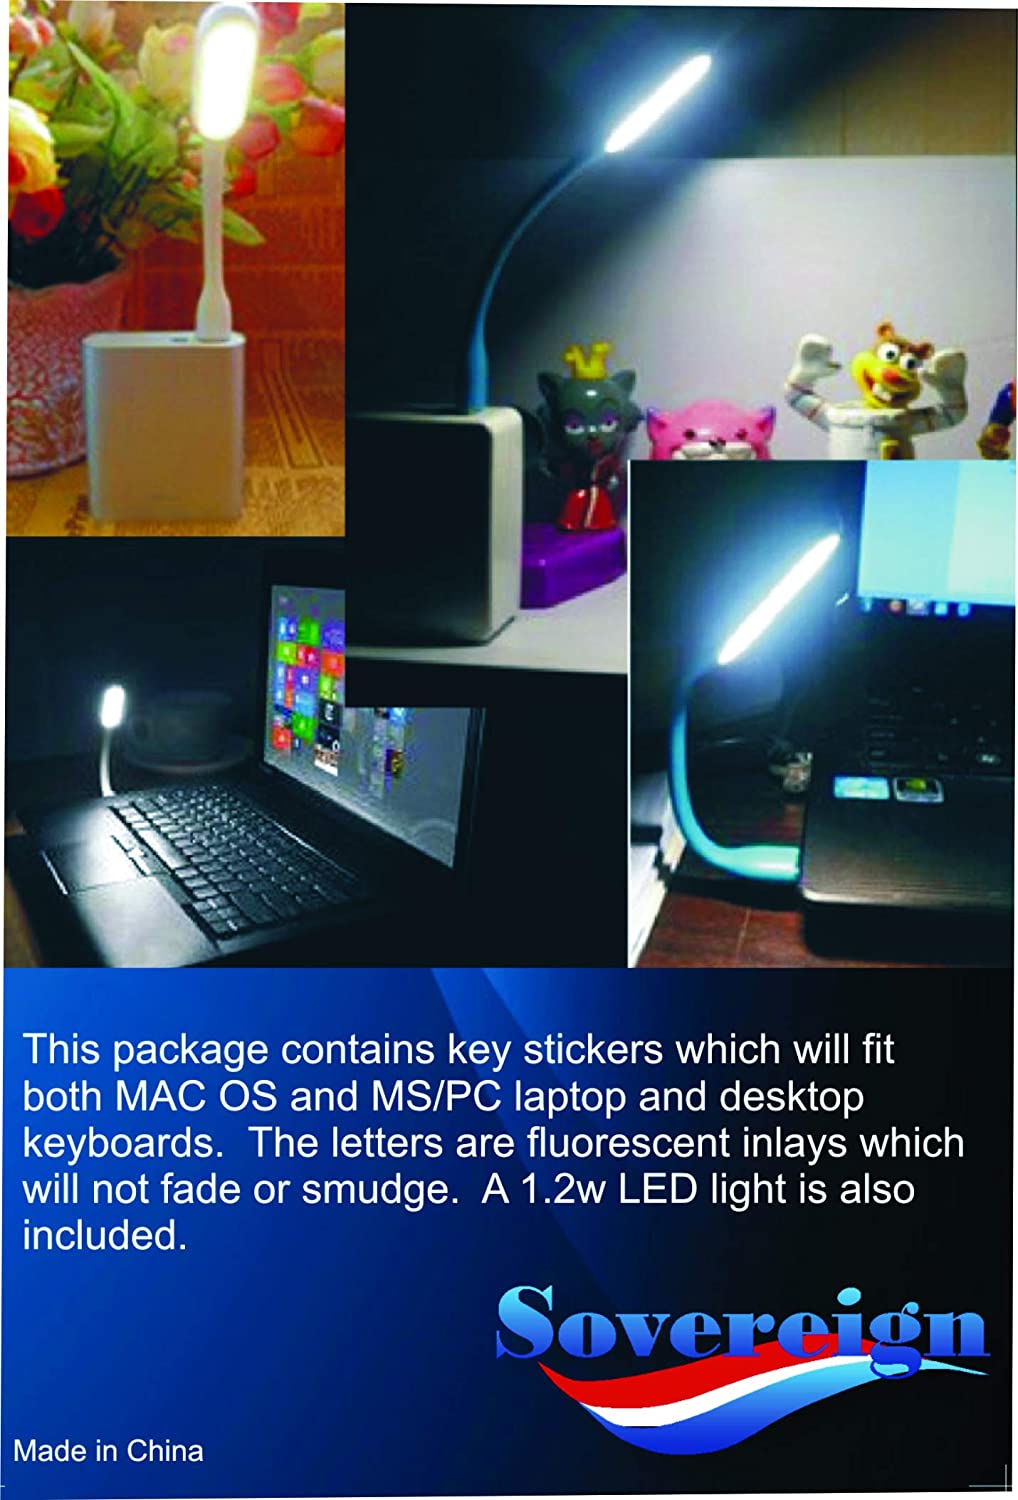 Plus USB Light Not Printed Letters Fluorescent Keyboard Stickers Will Not Wear or Fade U.S. English Keyboard Commercial Grade Inlays XLarge Symbols Great for Sight Impaired. 